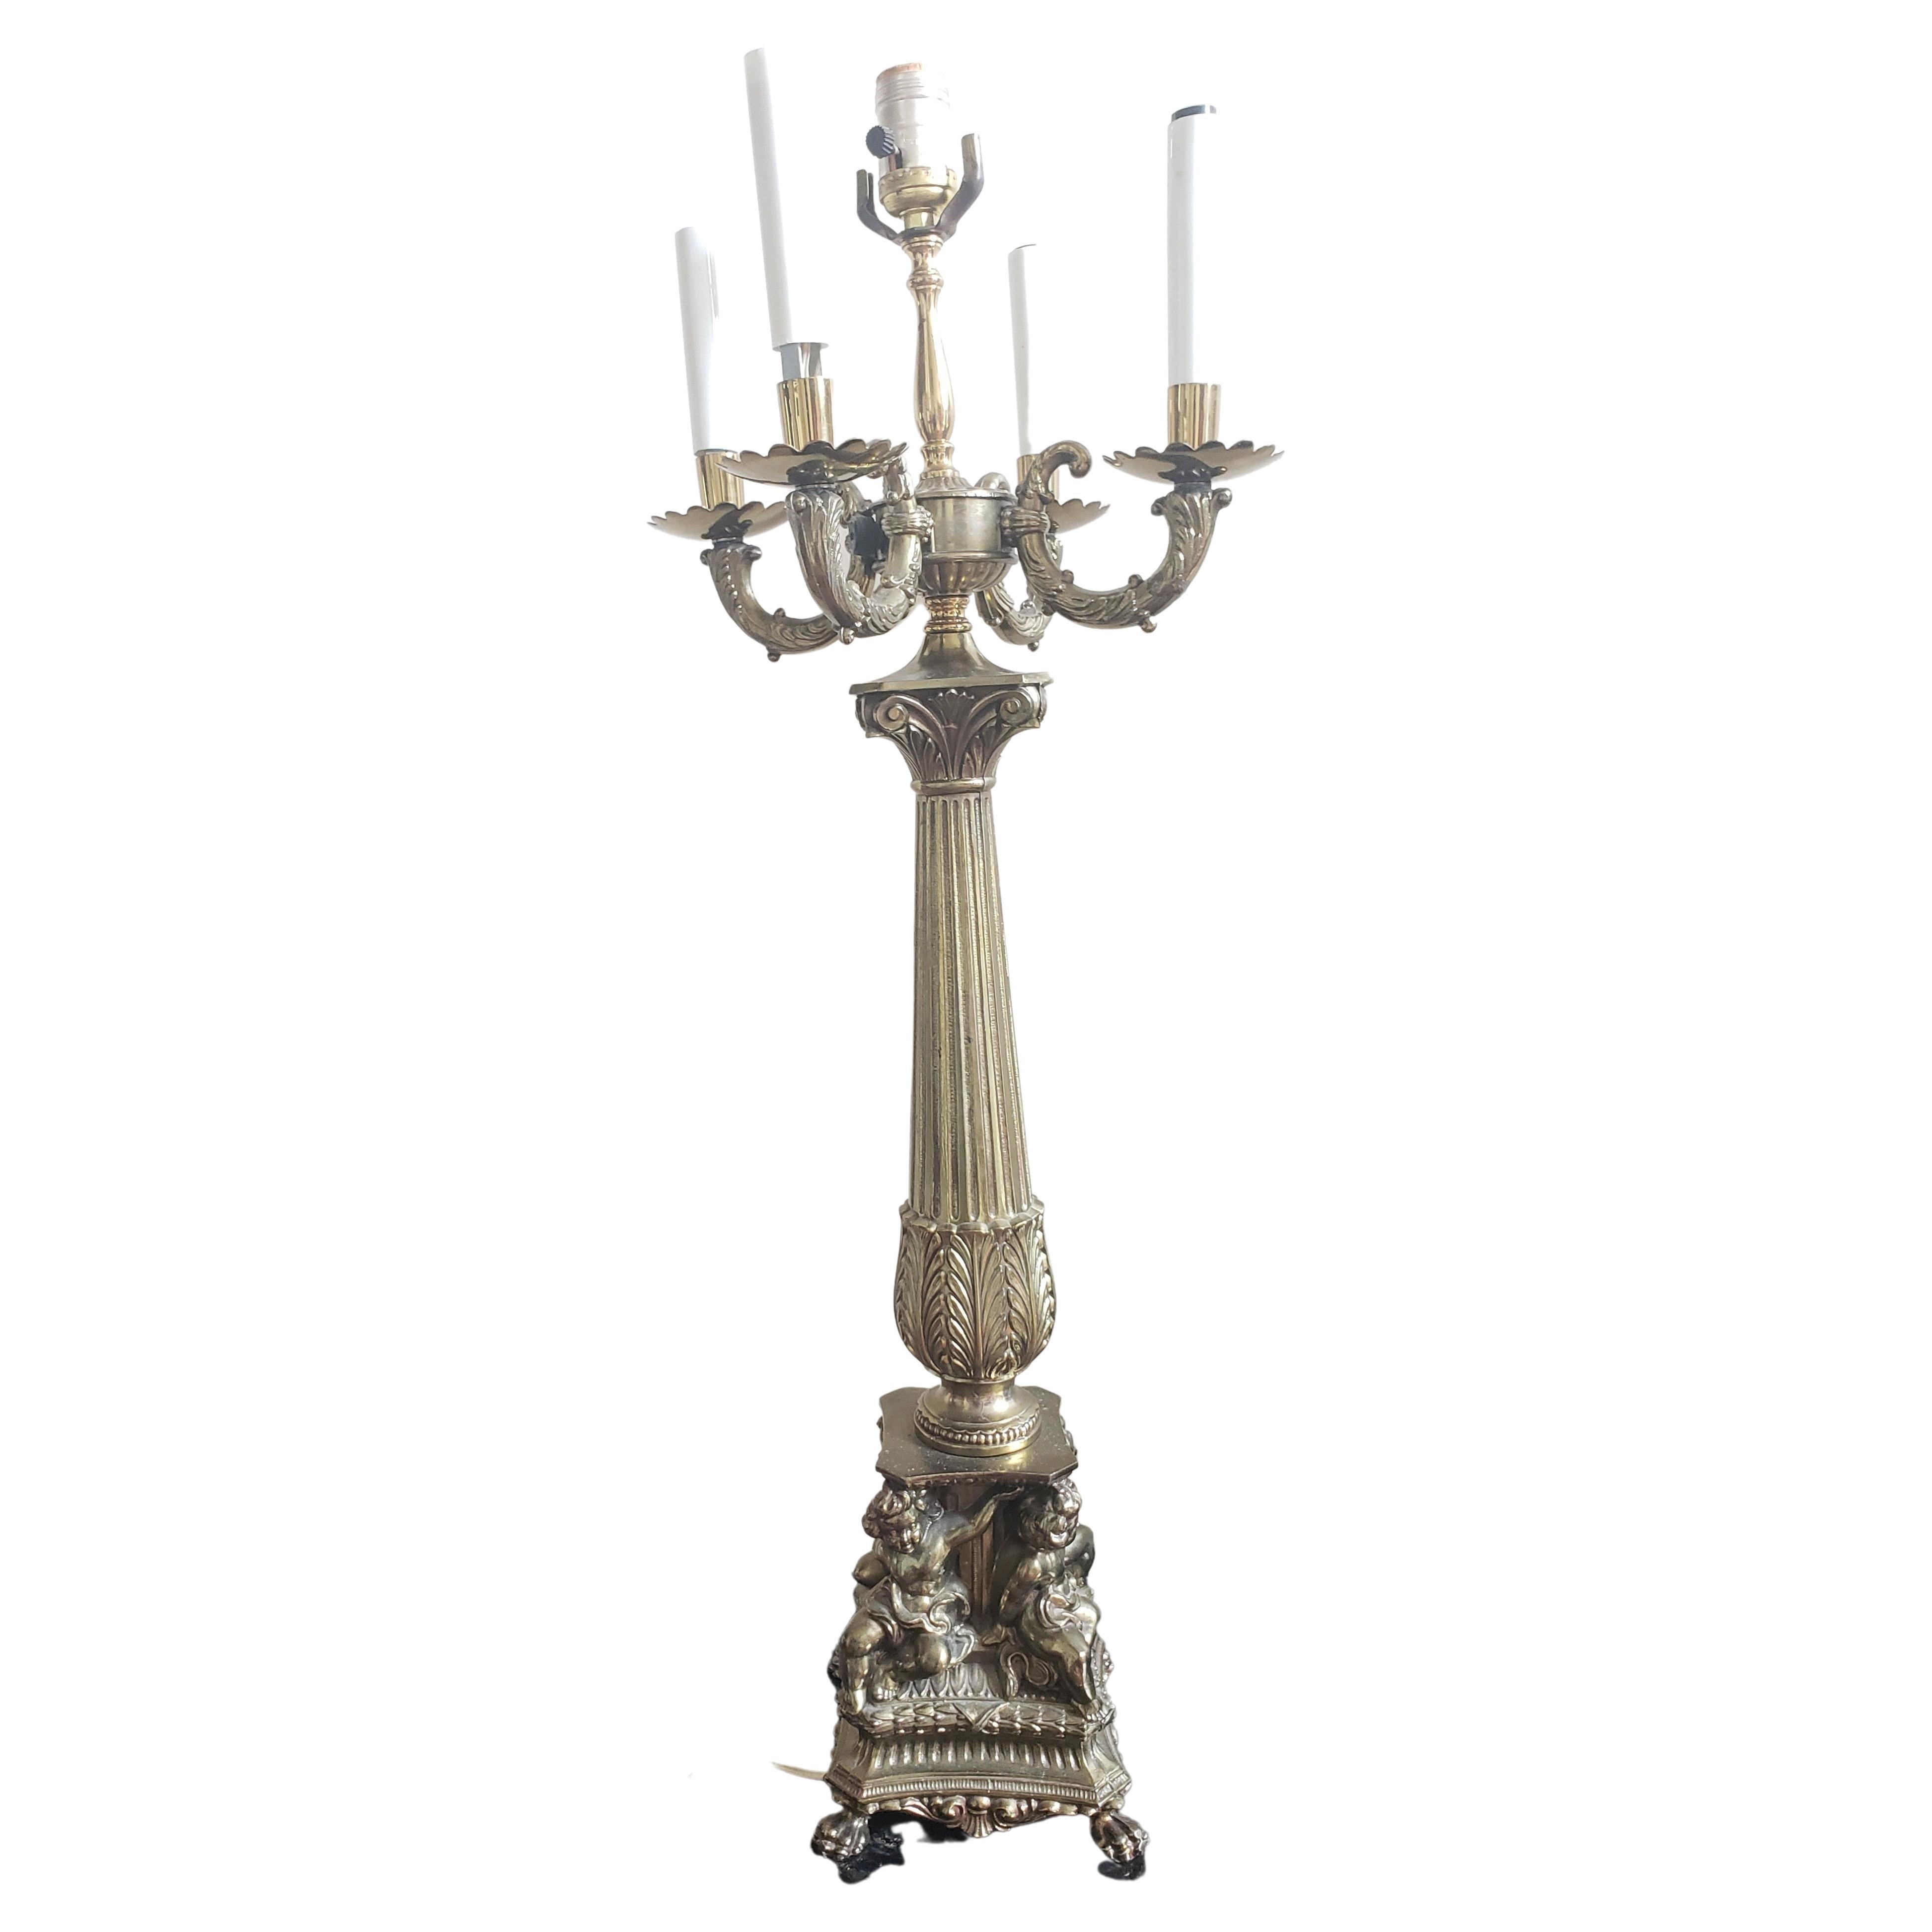 An impressive Pair of Early 1900s French Gilt Spelter Cherub 5-light column Table Lamps. 
Column base on 4 paw feet under  4 cherubs, a cannelure body. Measures 6.5 inches square base. and stands 32 inches tall to the top of the center main lamp